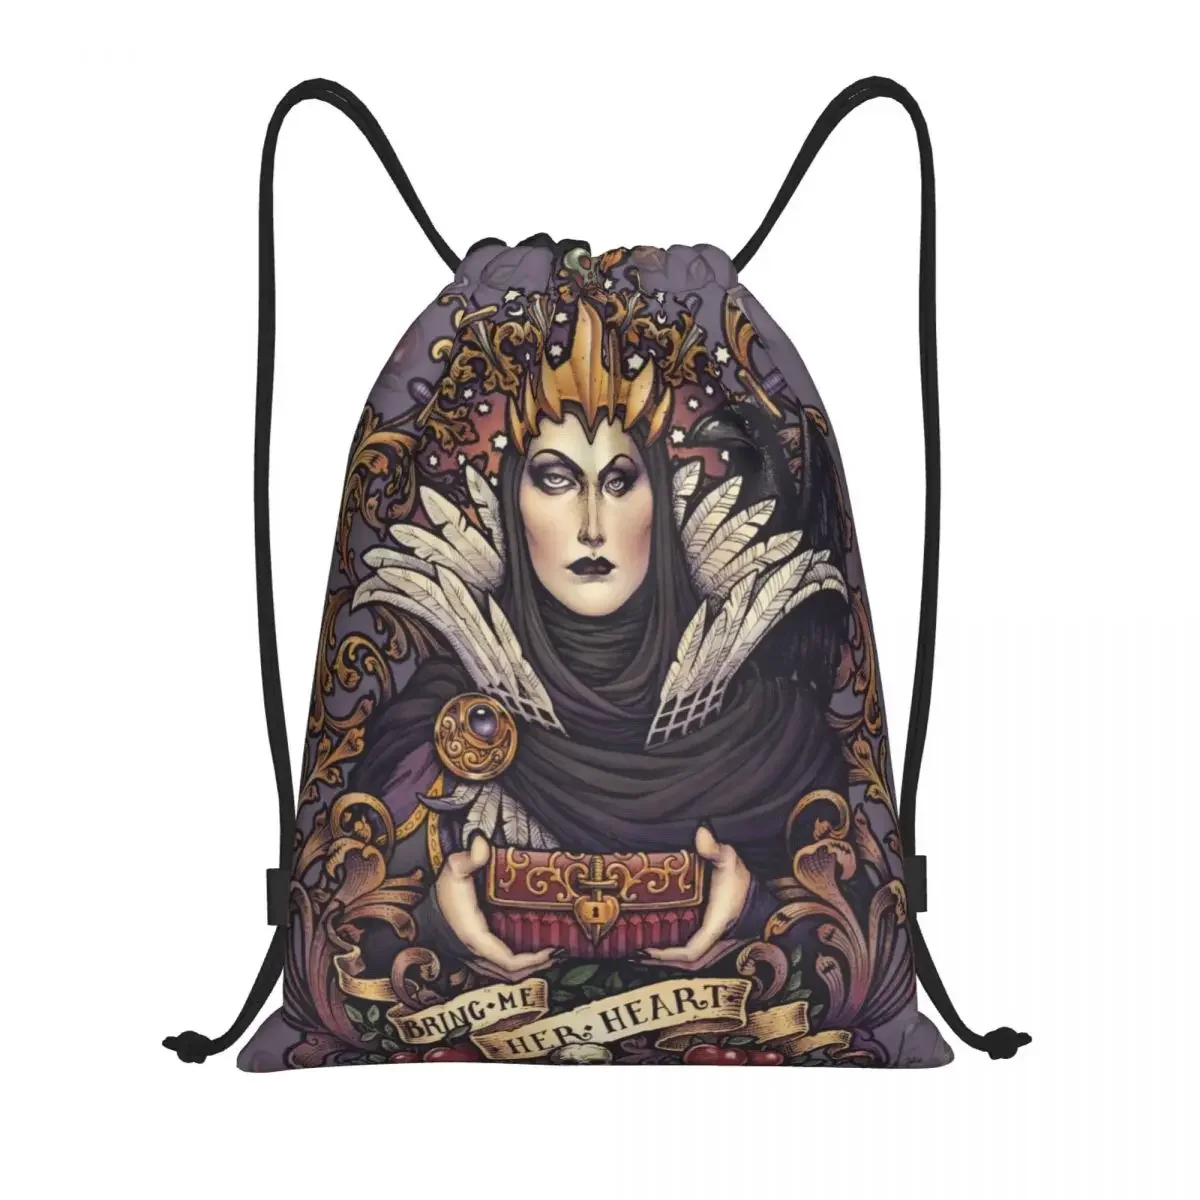 

Bring Me Her Heart Drawstring Backpack Sports Gym Bag for Men Women Evil Queen Halloween Witch Shopping Sackpack